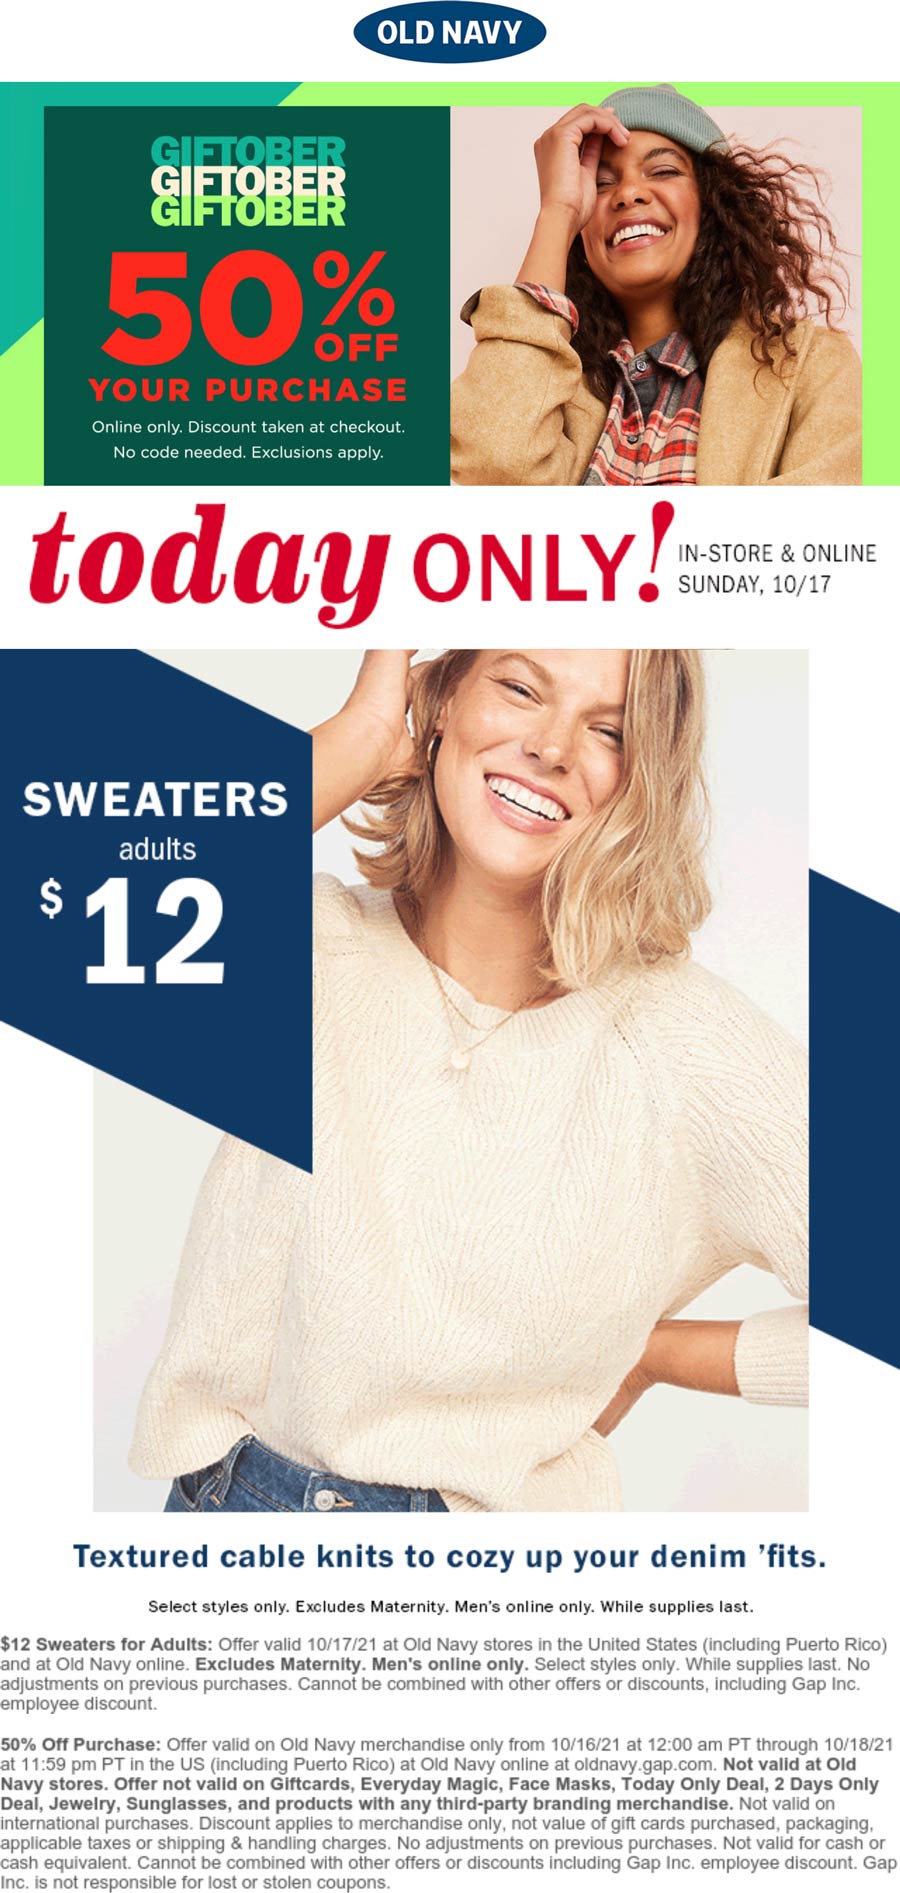 Old Navy stores Coupon  $12 sweaters today & 50% off online at Old Navy #oldnavy 